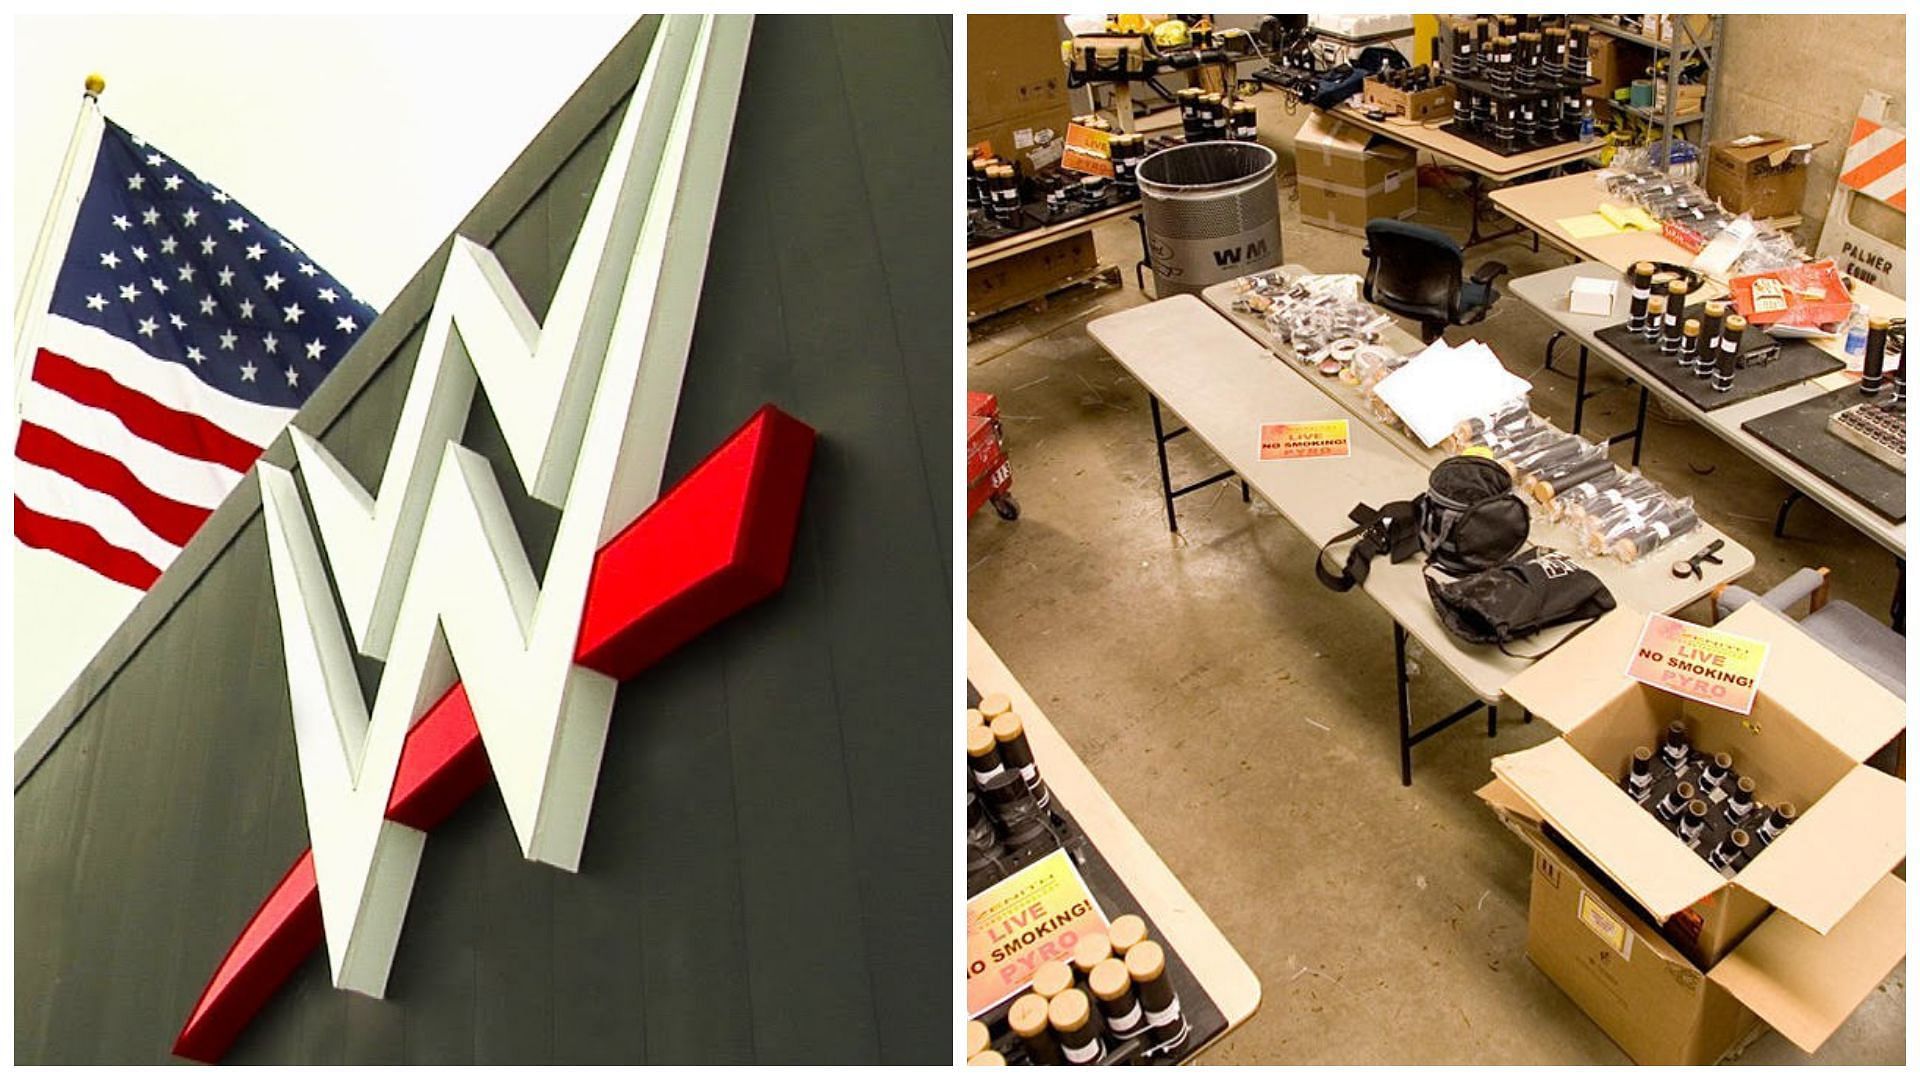 A new WWE producer has been hired.